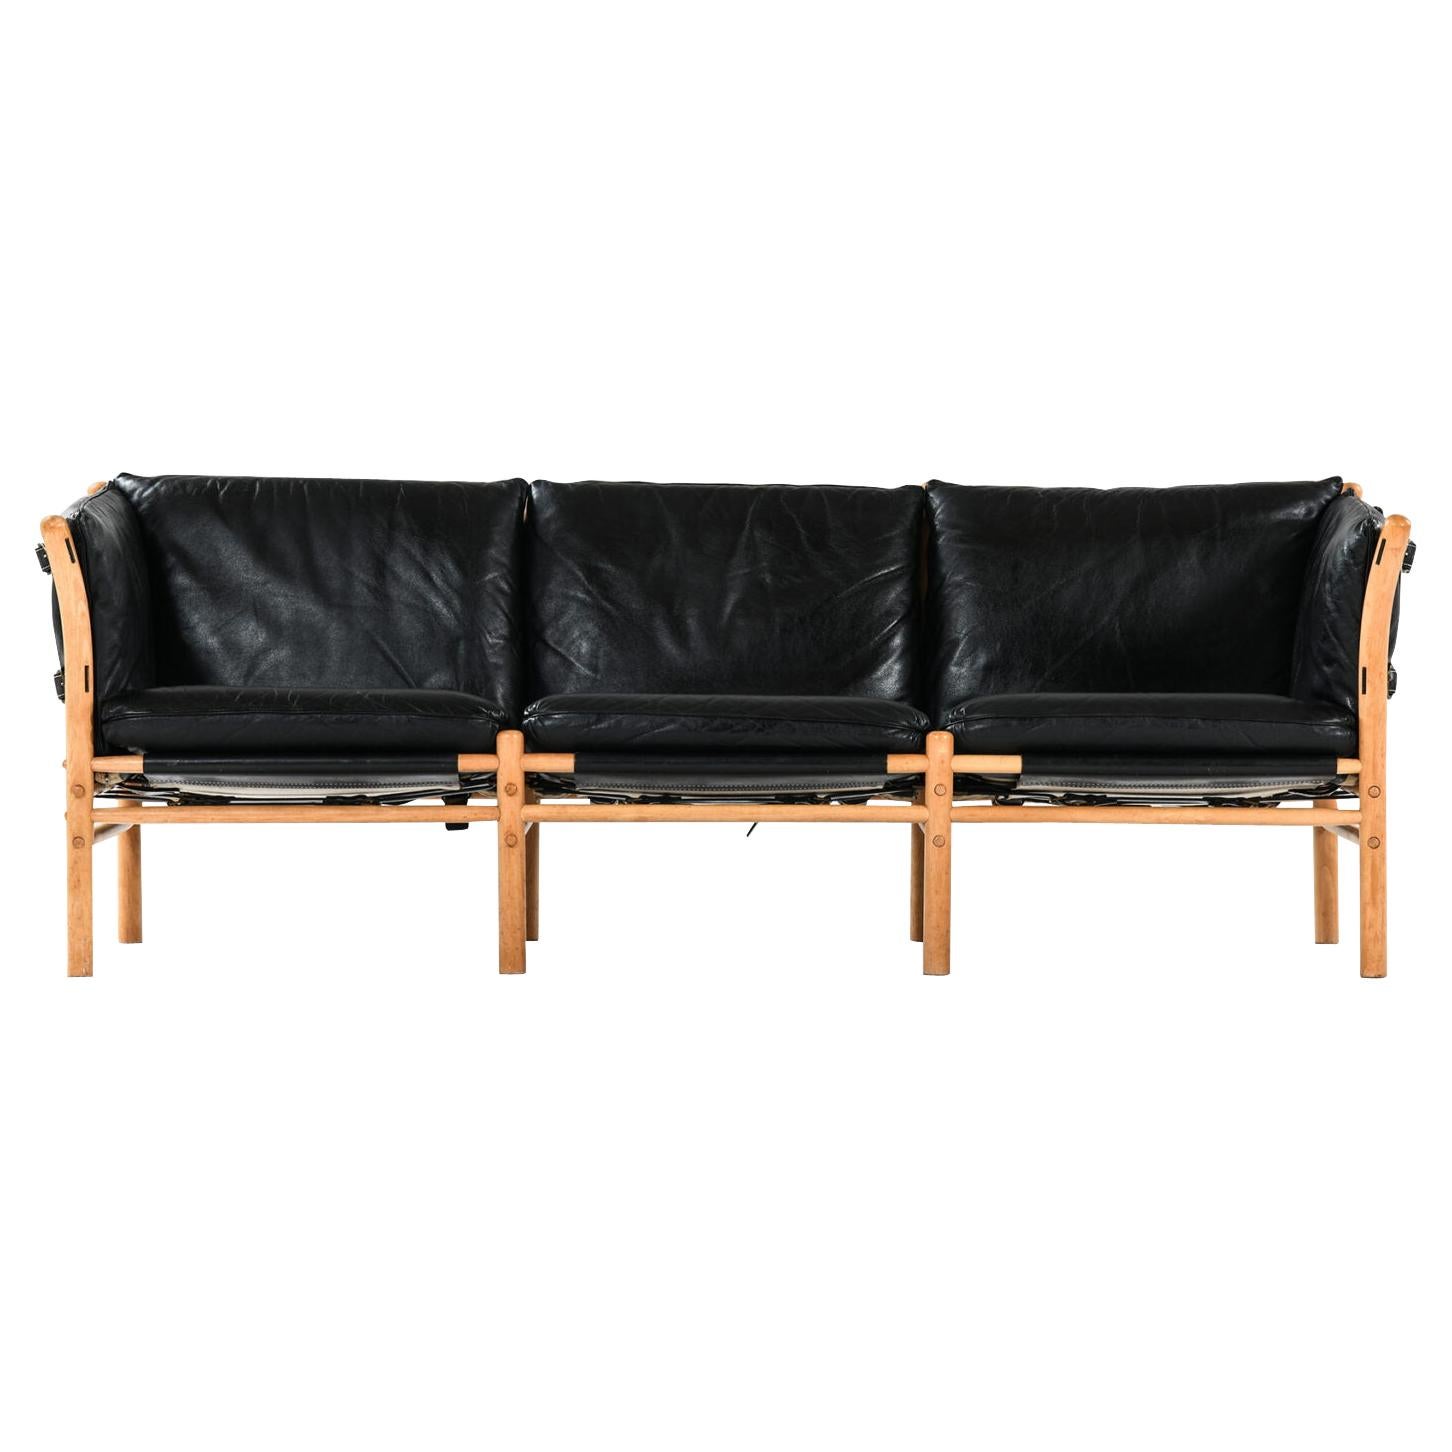 Arne Norell Sofa Model Ilona Produced by Arne Norell AB in Aneby, Sweden For Sale